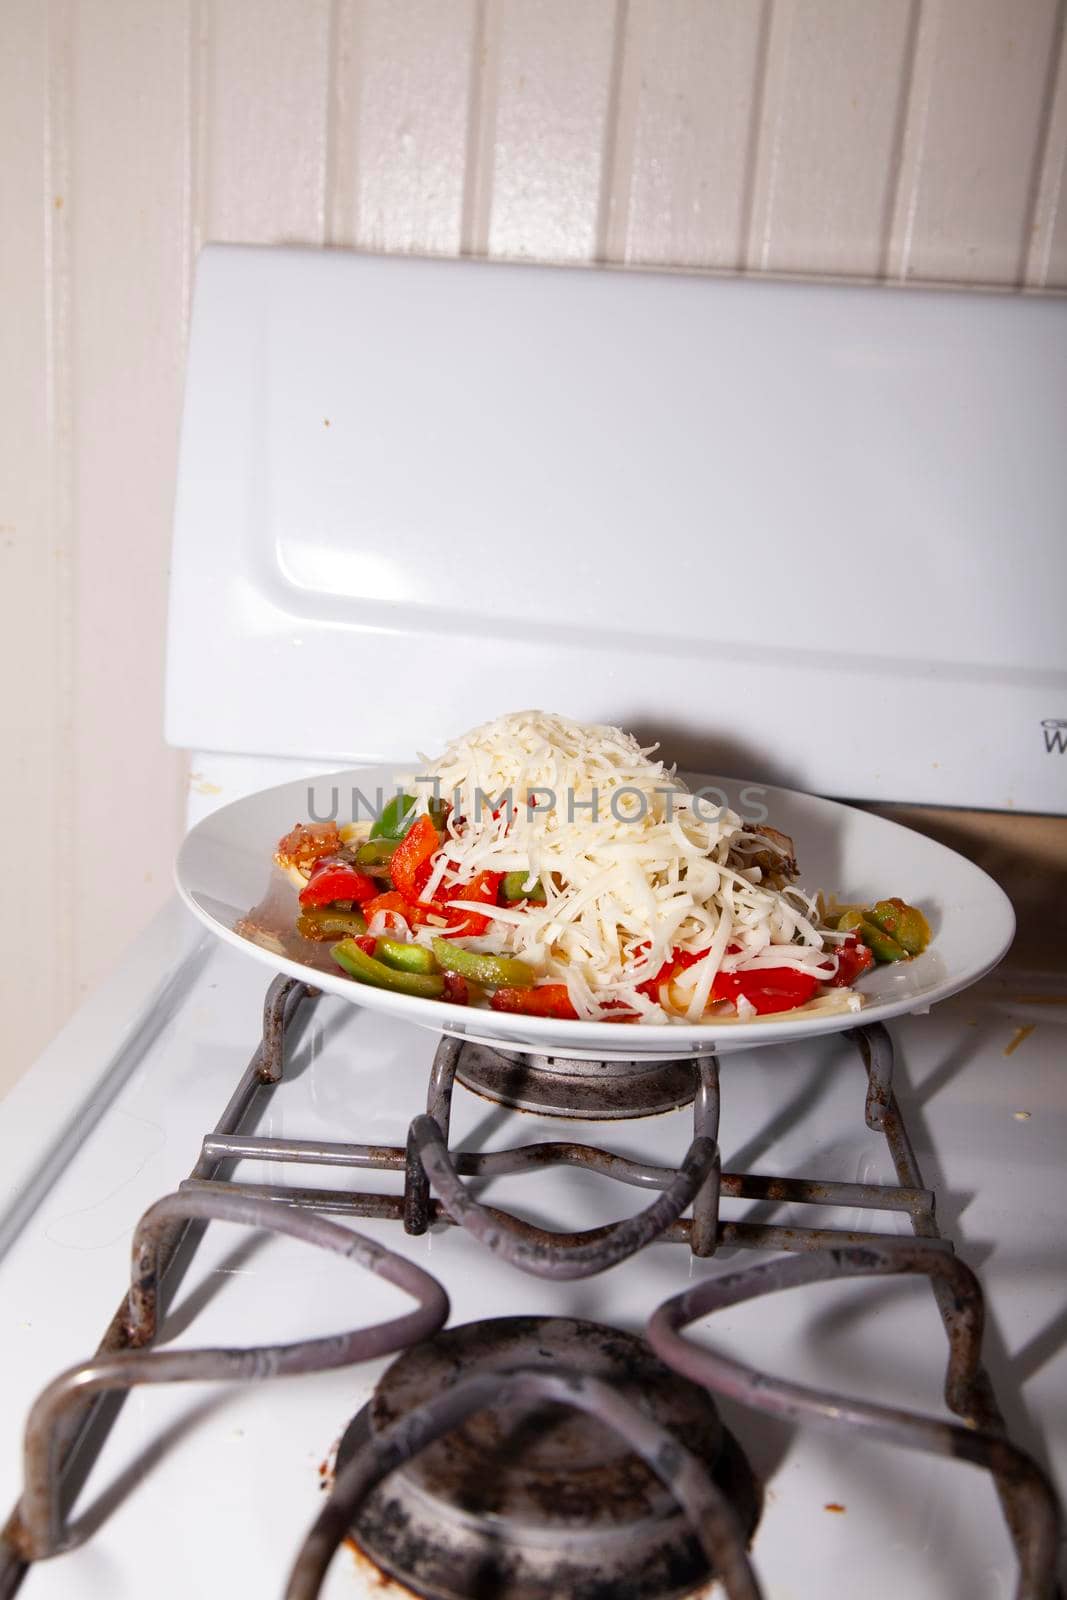 Shredded mozzarella cheese on a plate of spaghetti and bell peppers